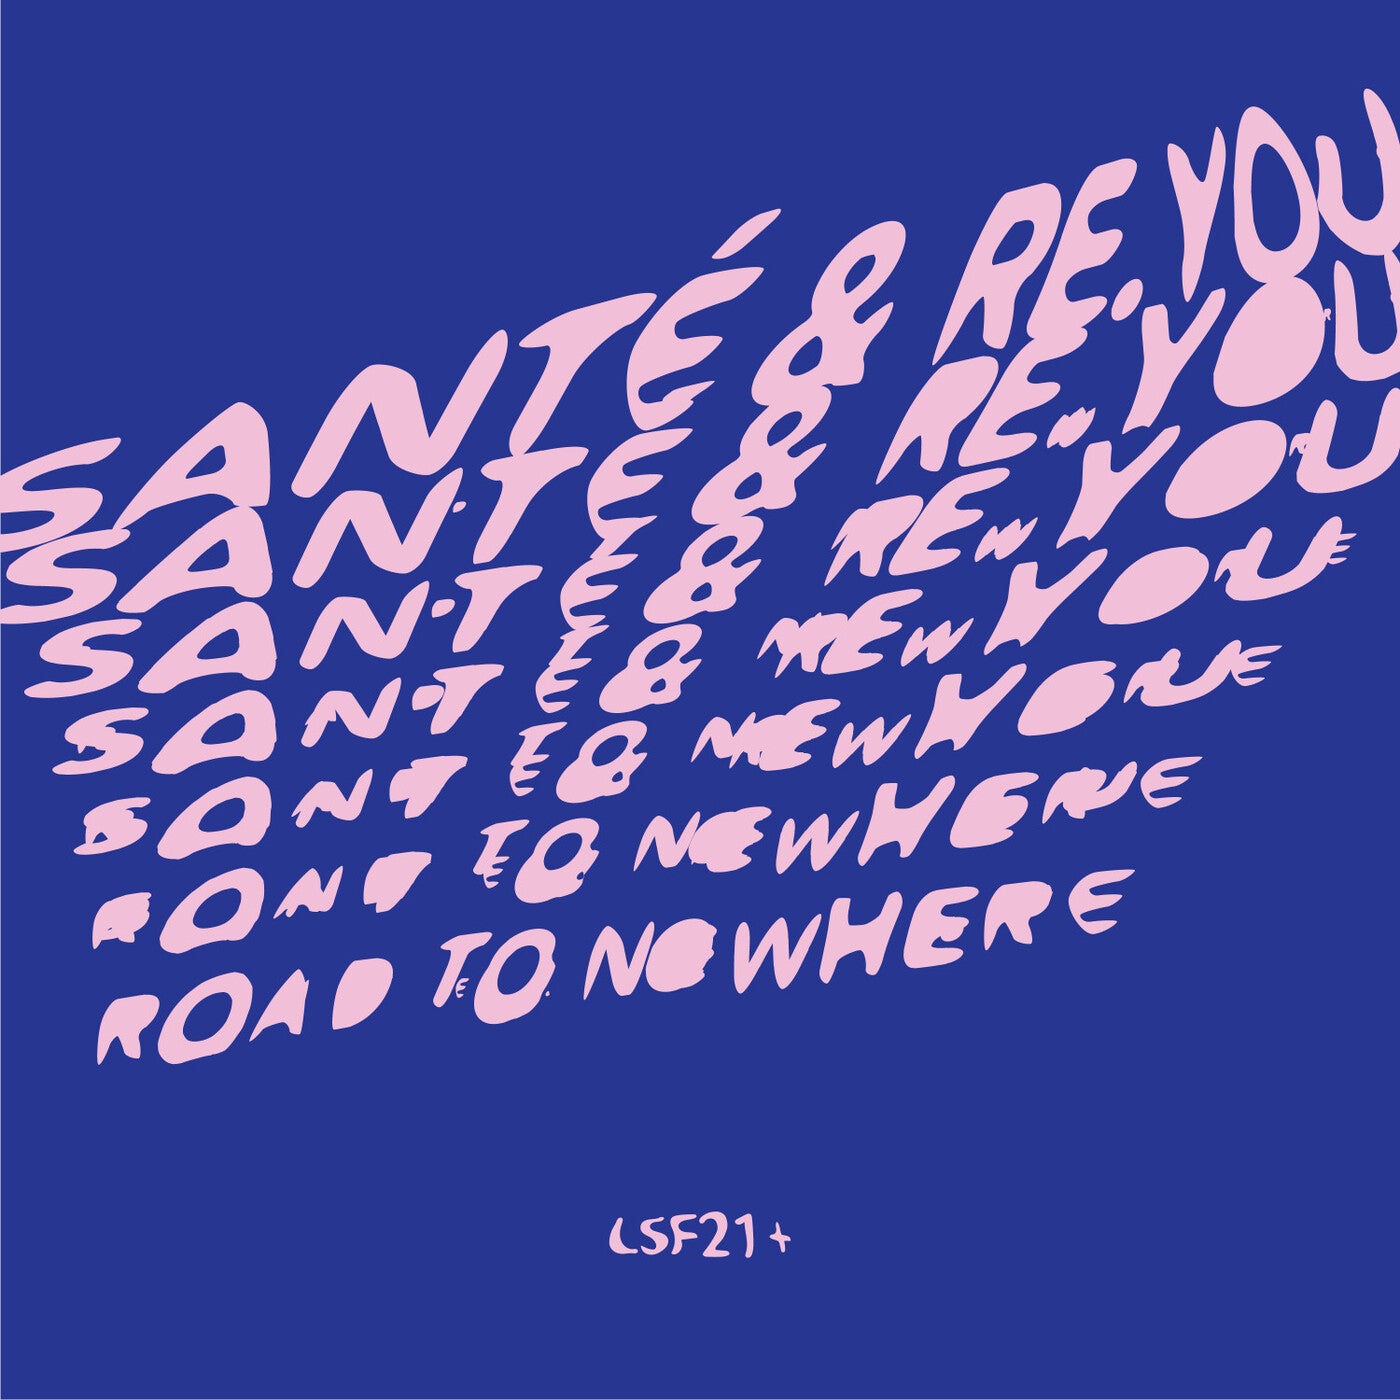 Re.You, Biishop, Oluhle, Sante – Road To Nowhere EP [LSF001]